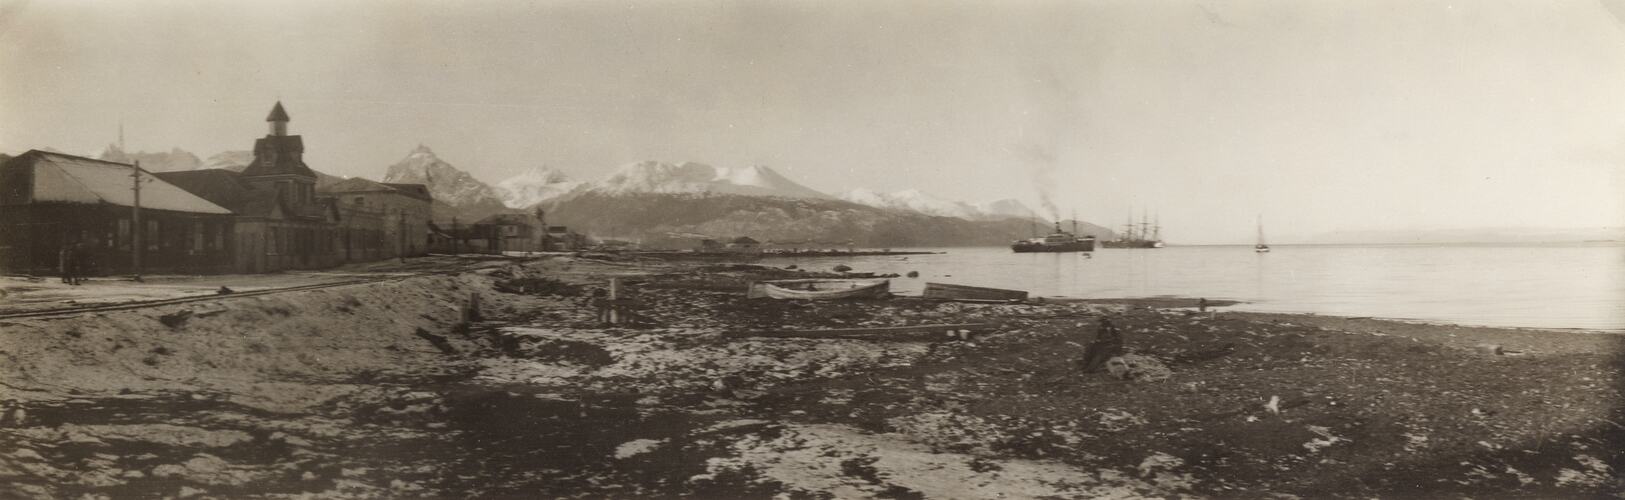 Panorama depicting Ushuaia, Tierra Del Fuego, showing Mount Olive, c.1929.